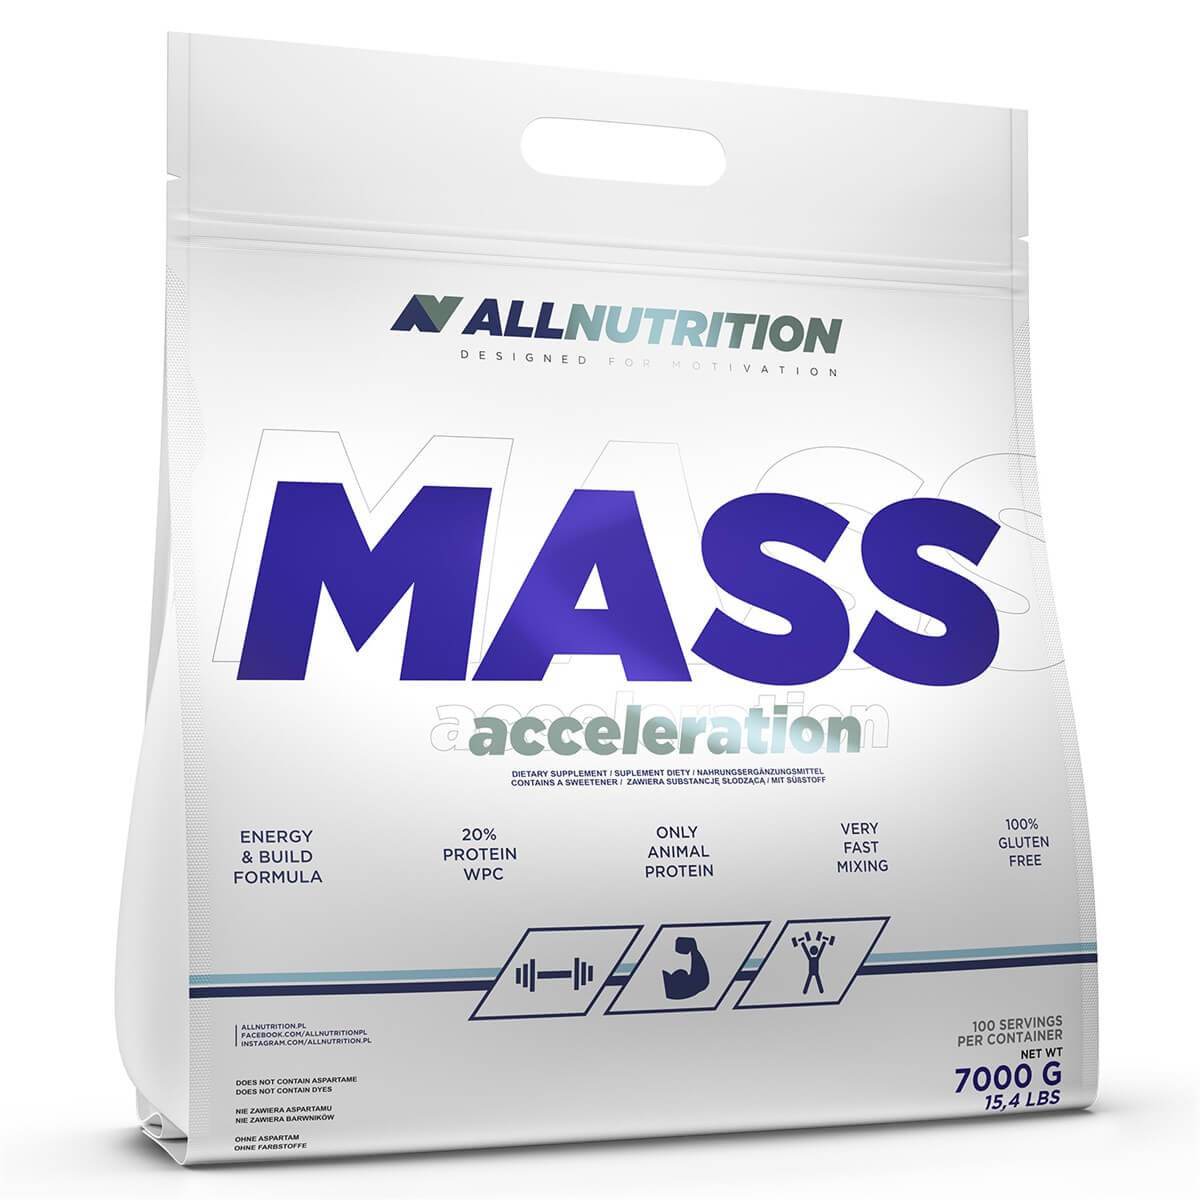 All Nutrition Mass Acceleration 7000g